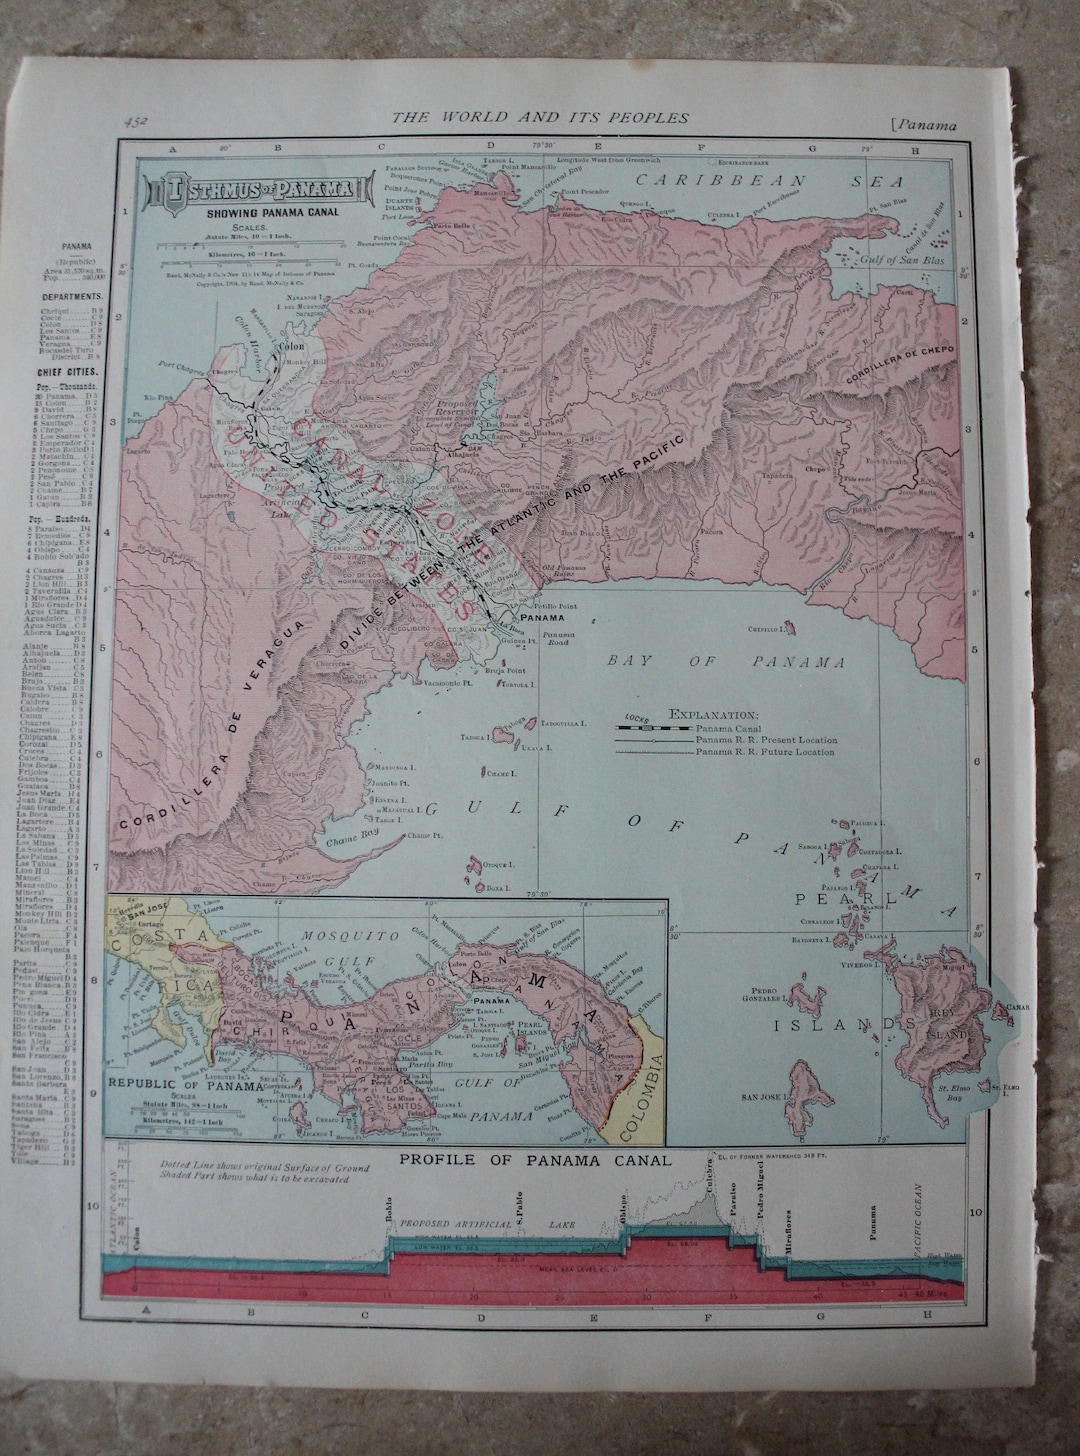 Historical Panama Canal Zone Map Photographs and Descriptions - Etsy